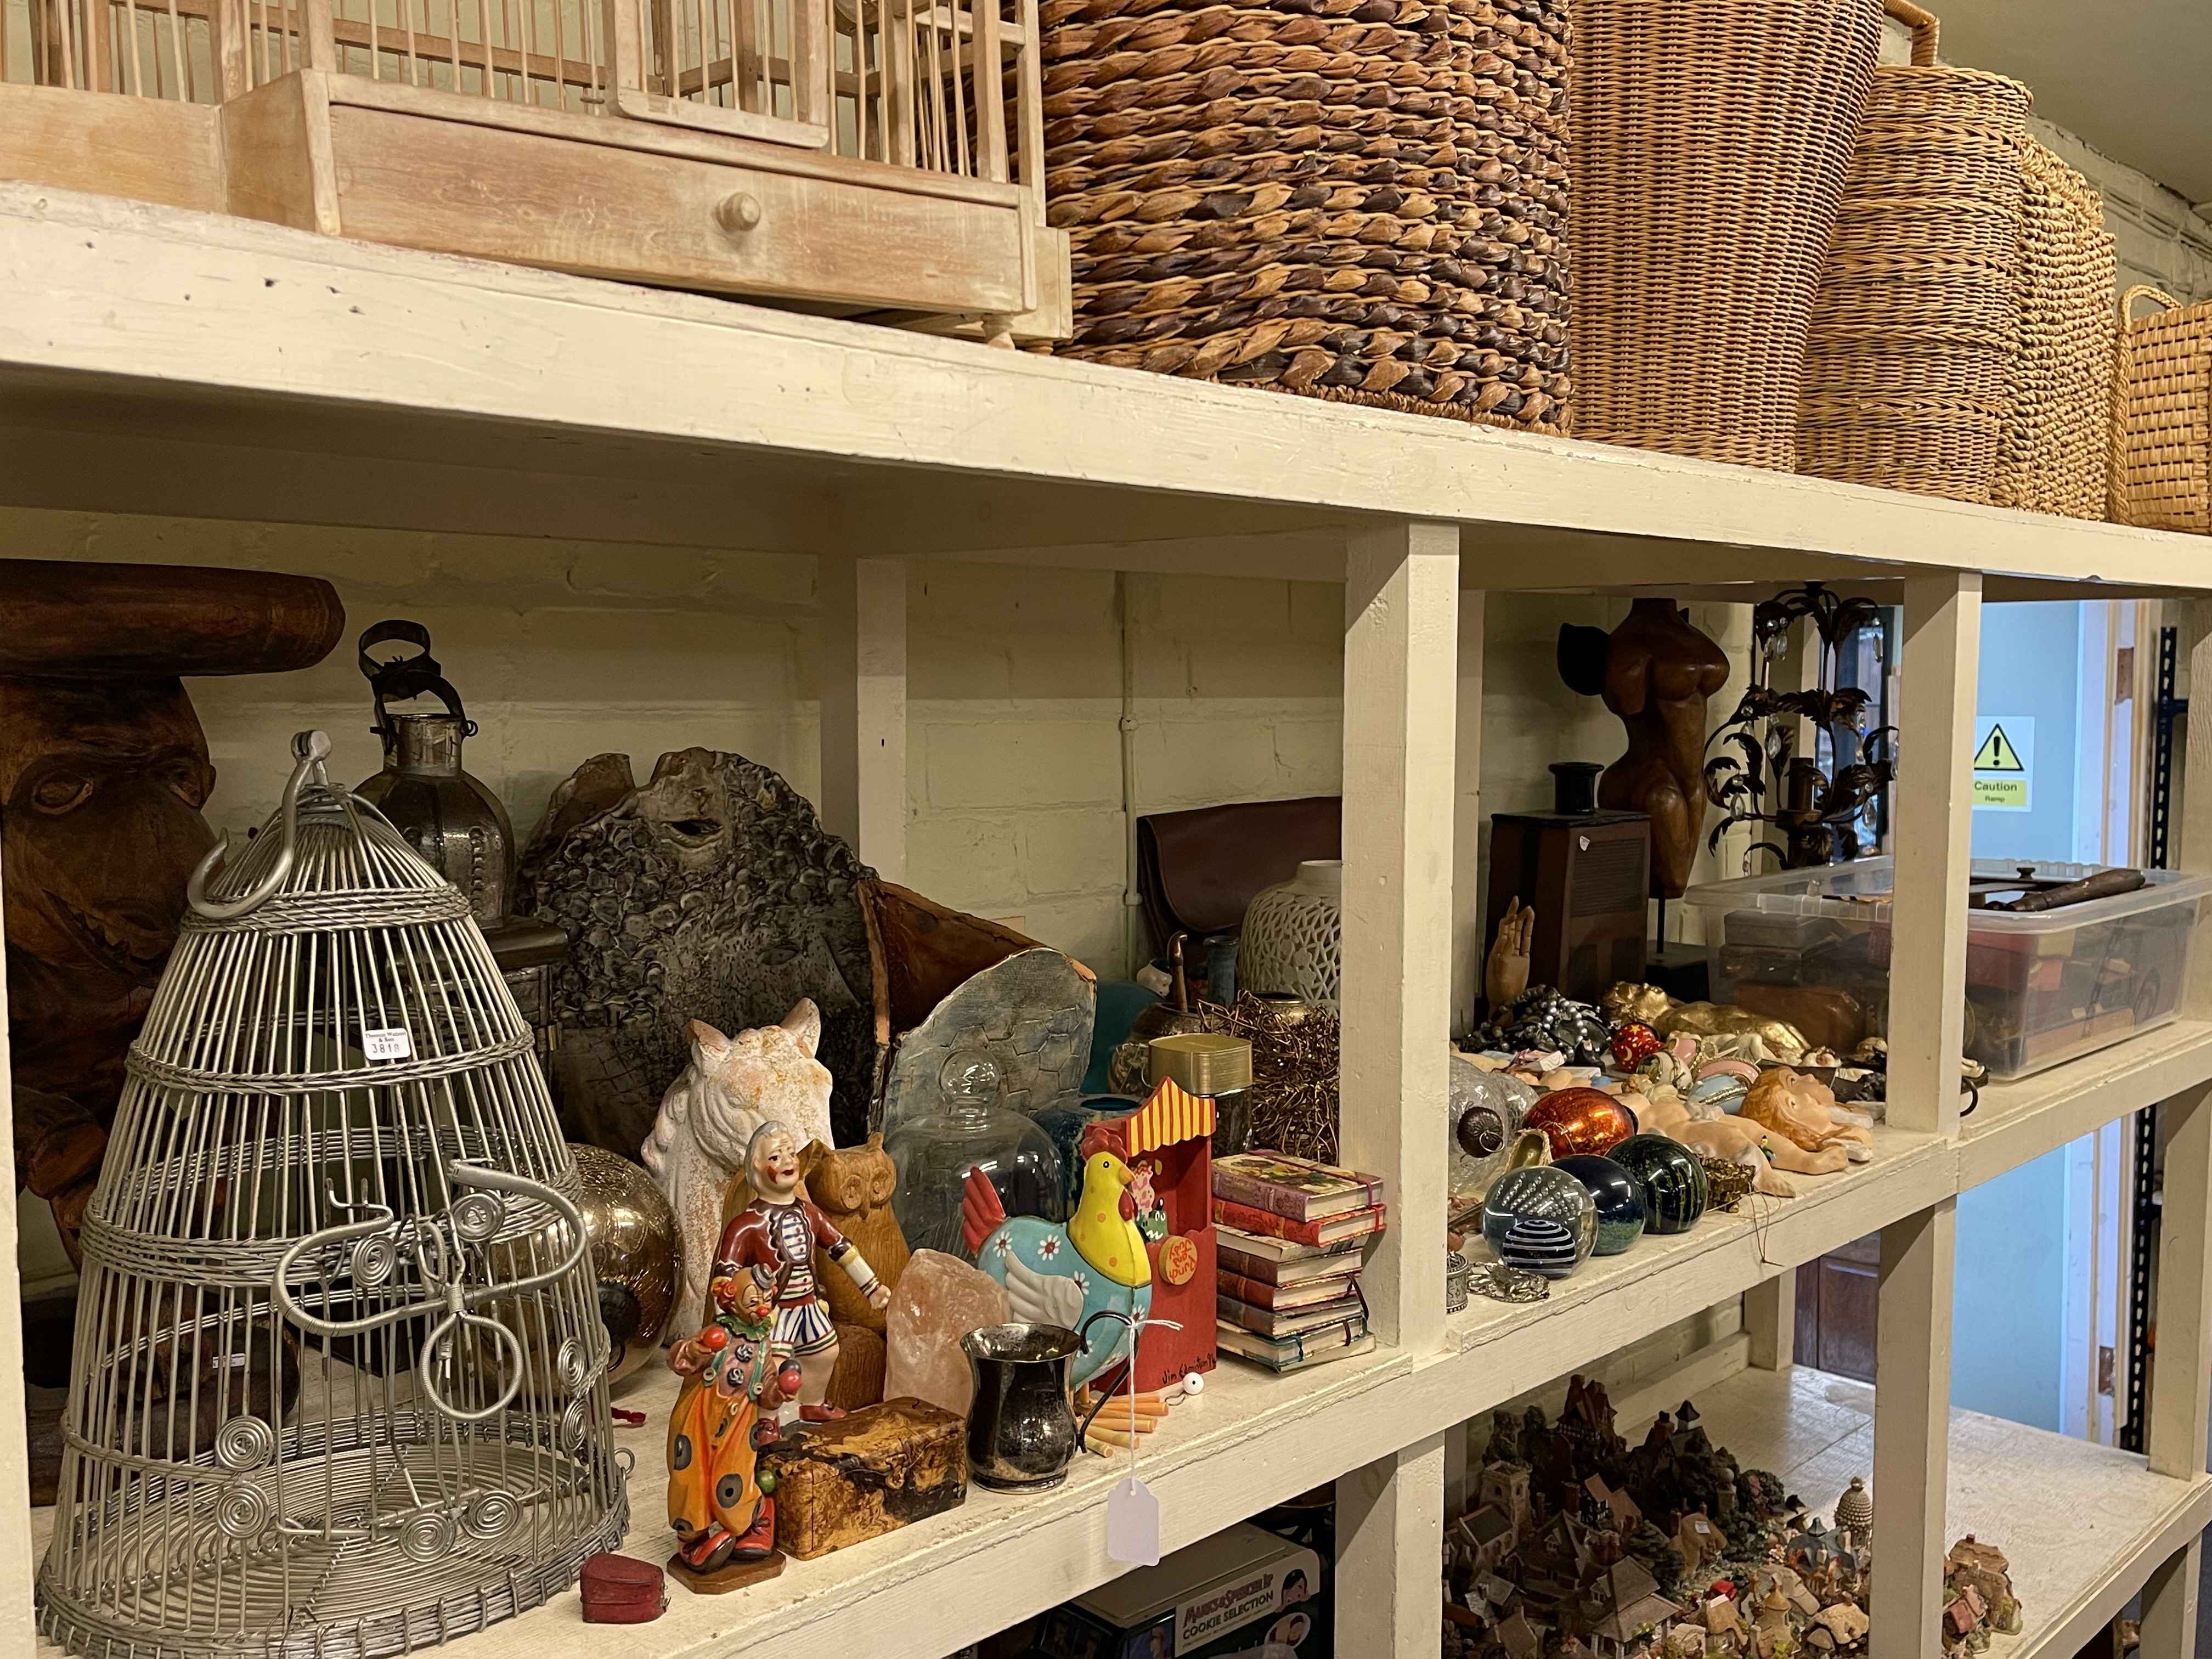 Collection of wicker baskets, wooden sculptures, cages, ornate pottery vases, hanging lantern, - Image 2 of 4